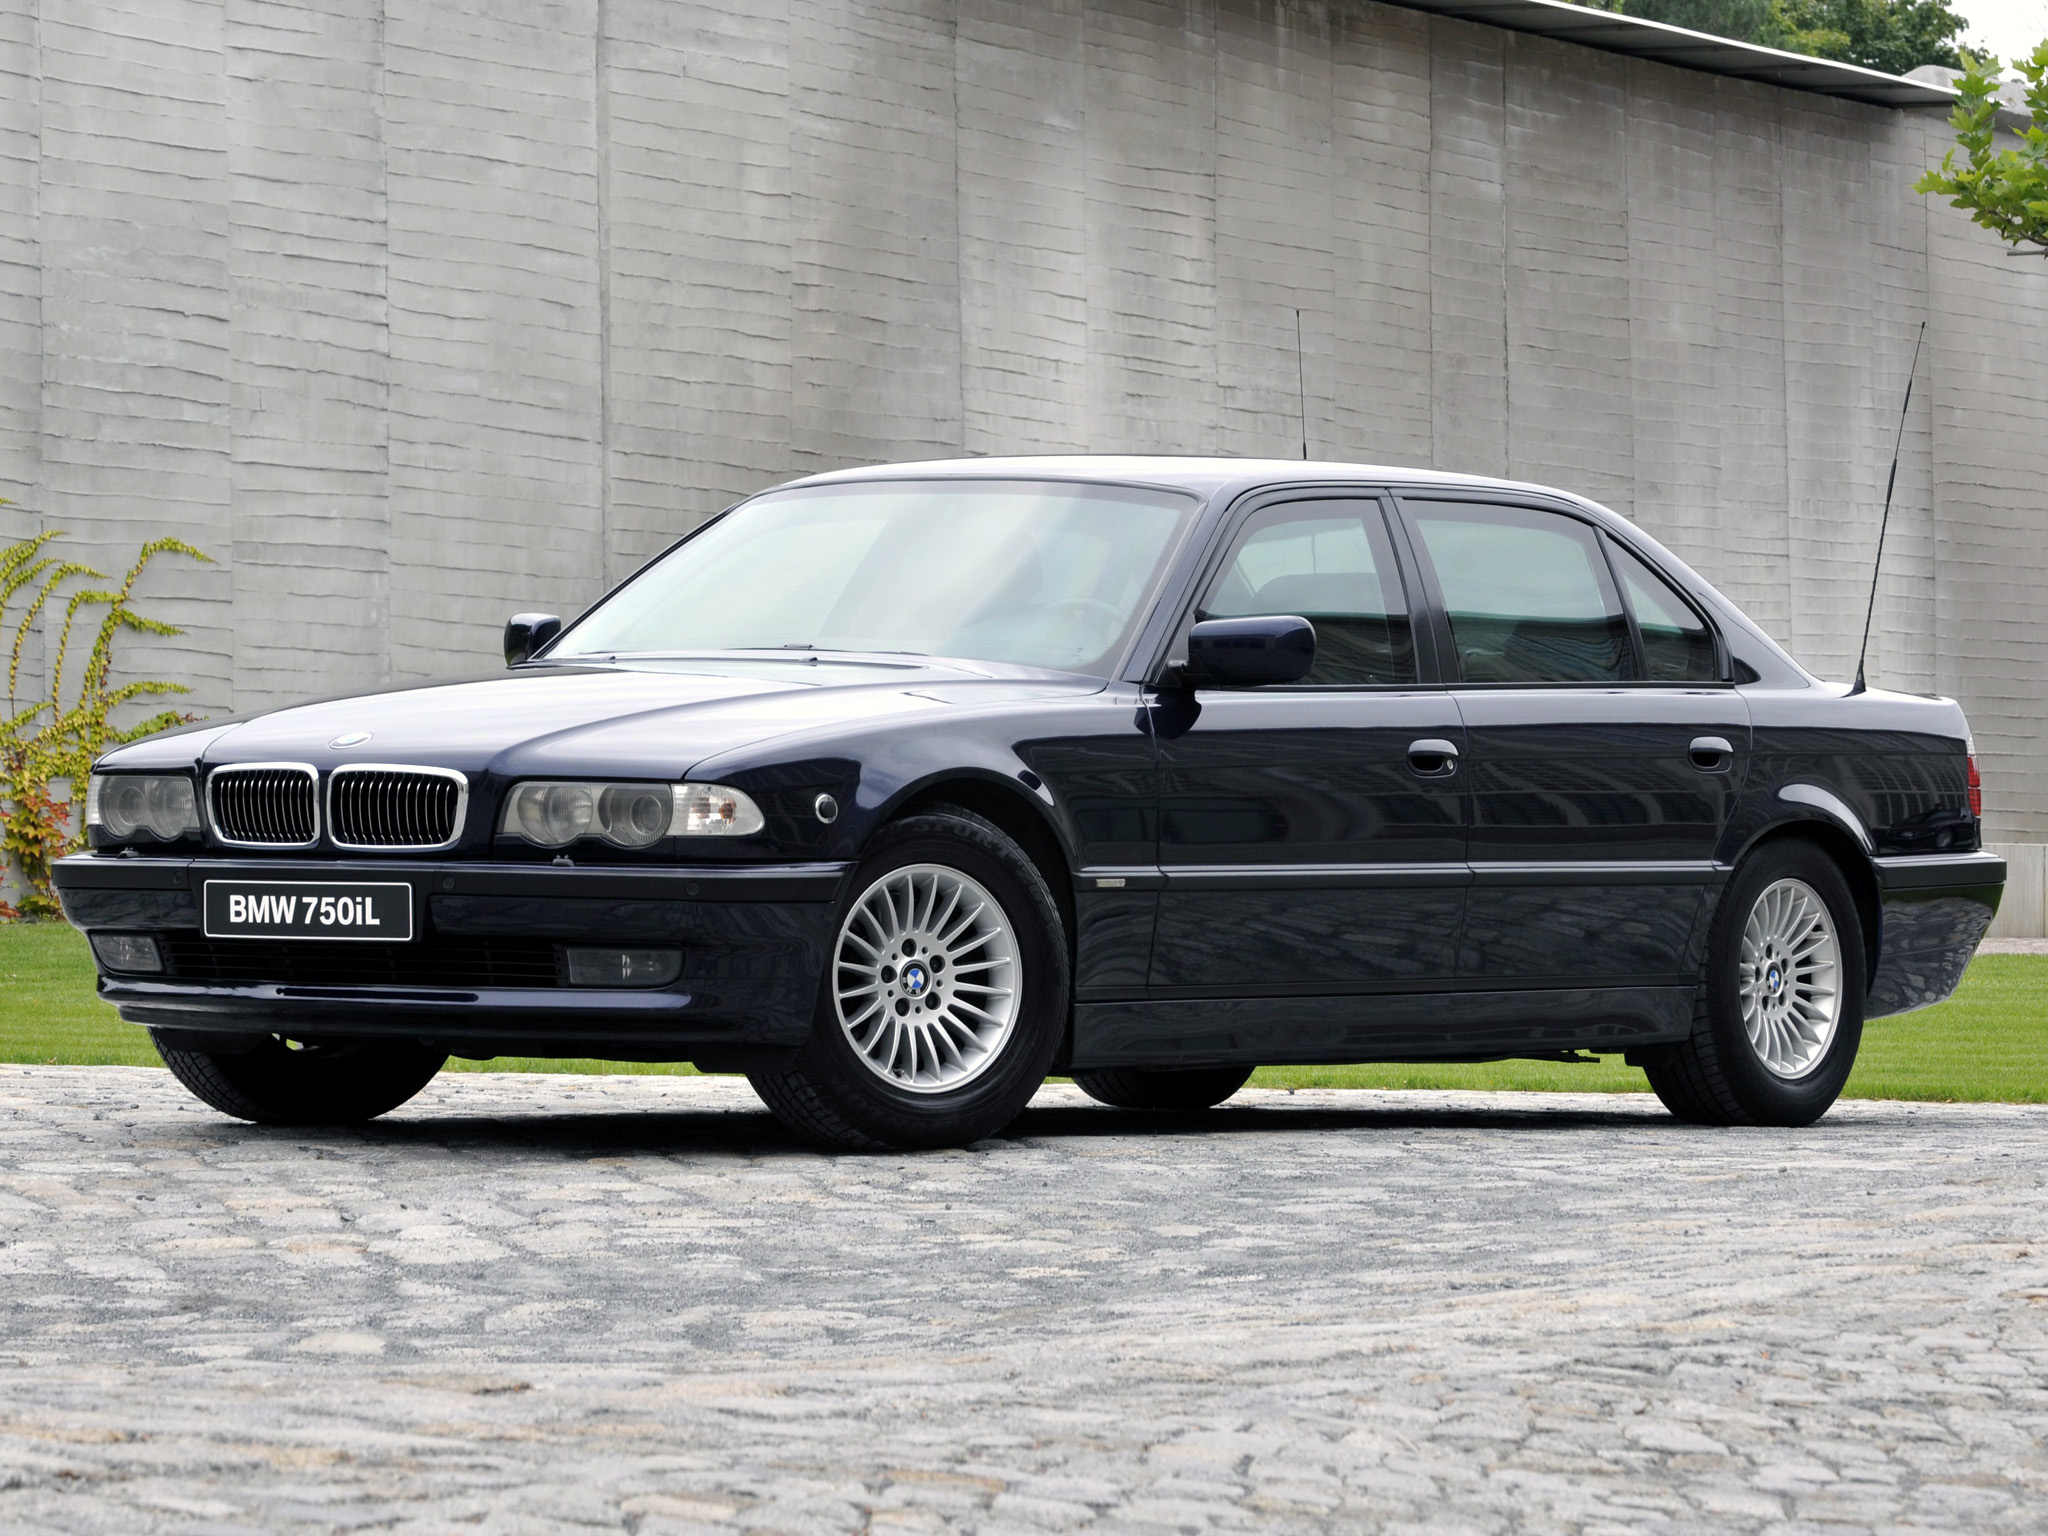 1998, Armored, Bmw, 750il, Security, E38, Luxury Wallpaper